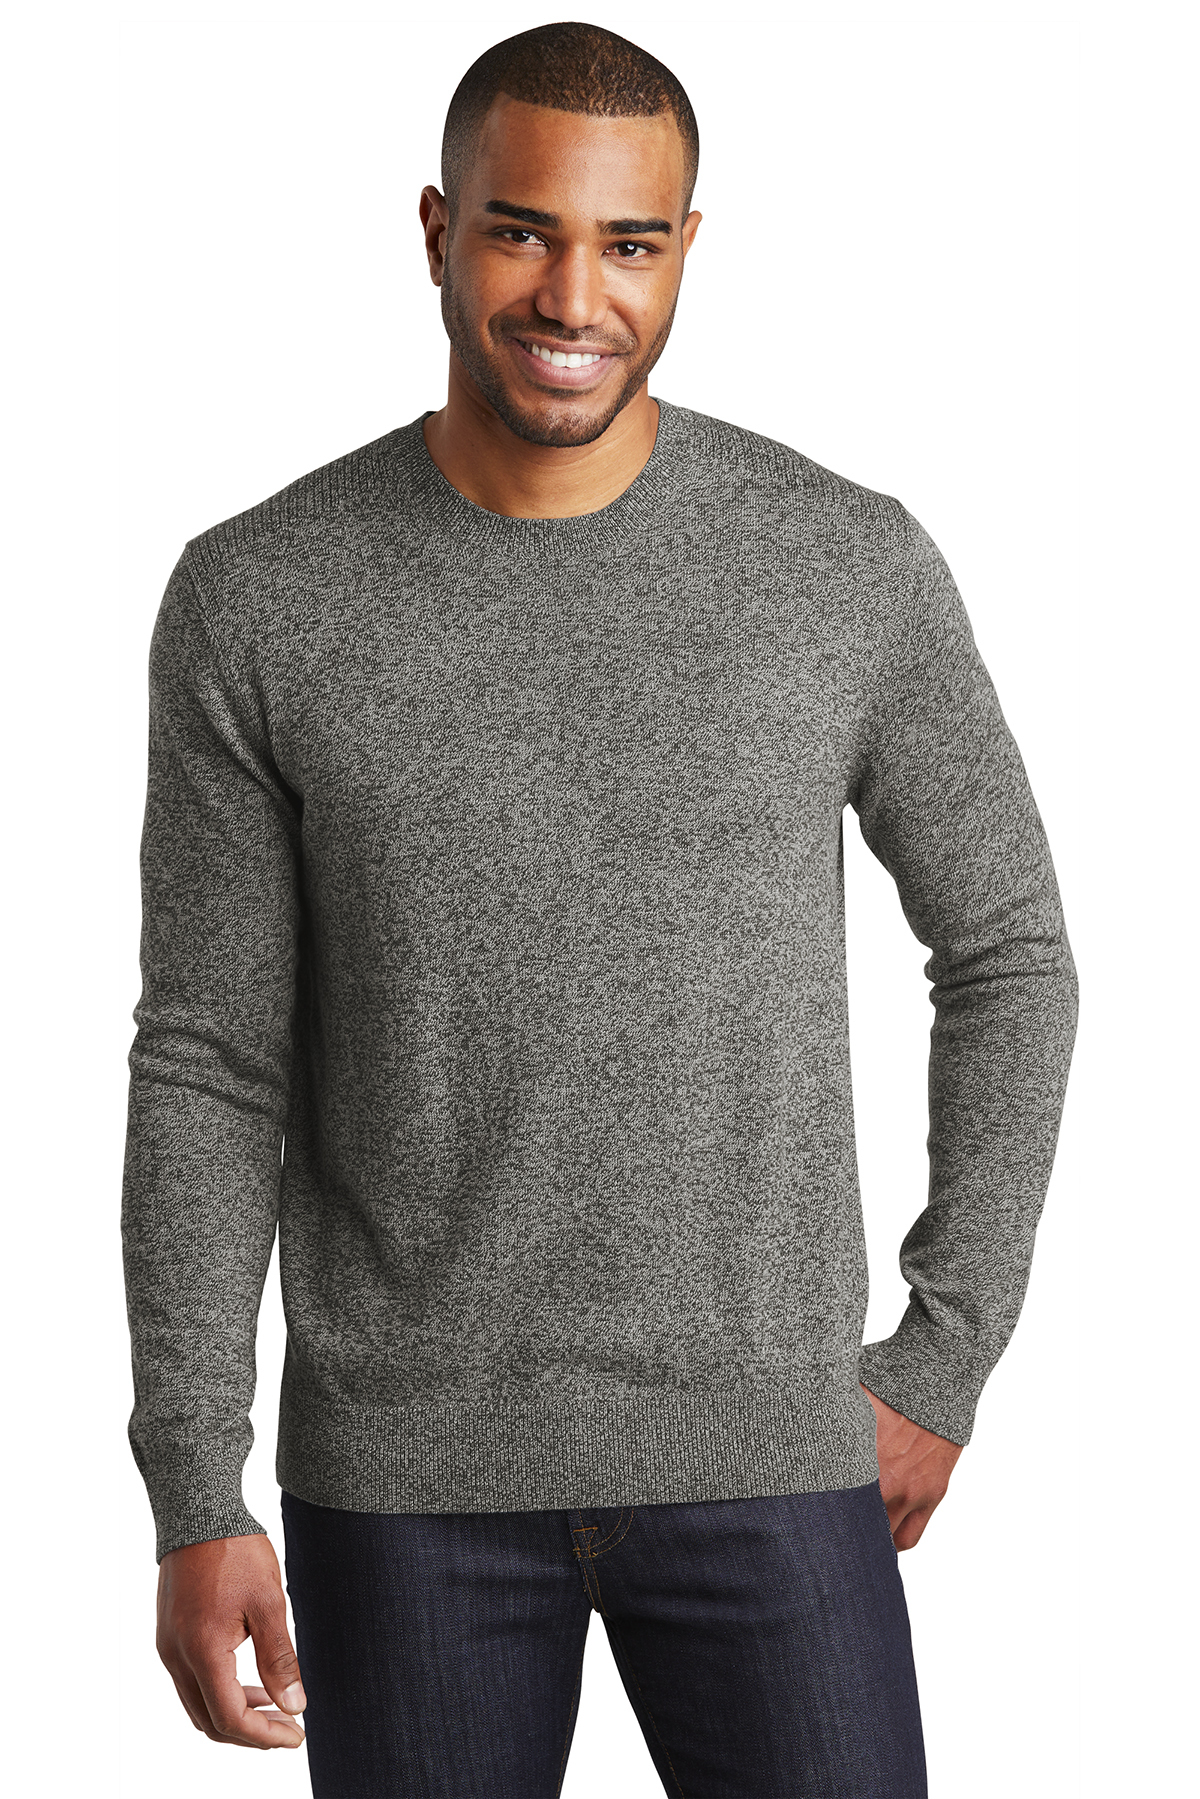 click to view Warm Grey Marl